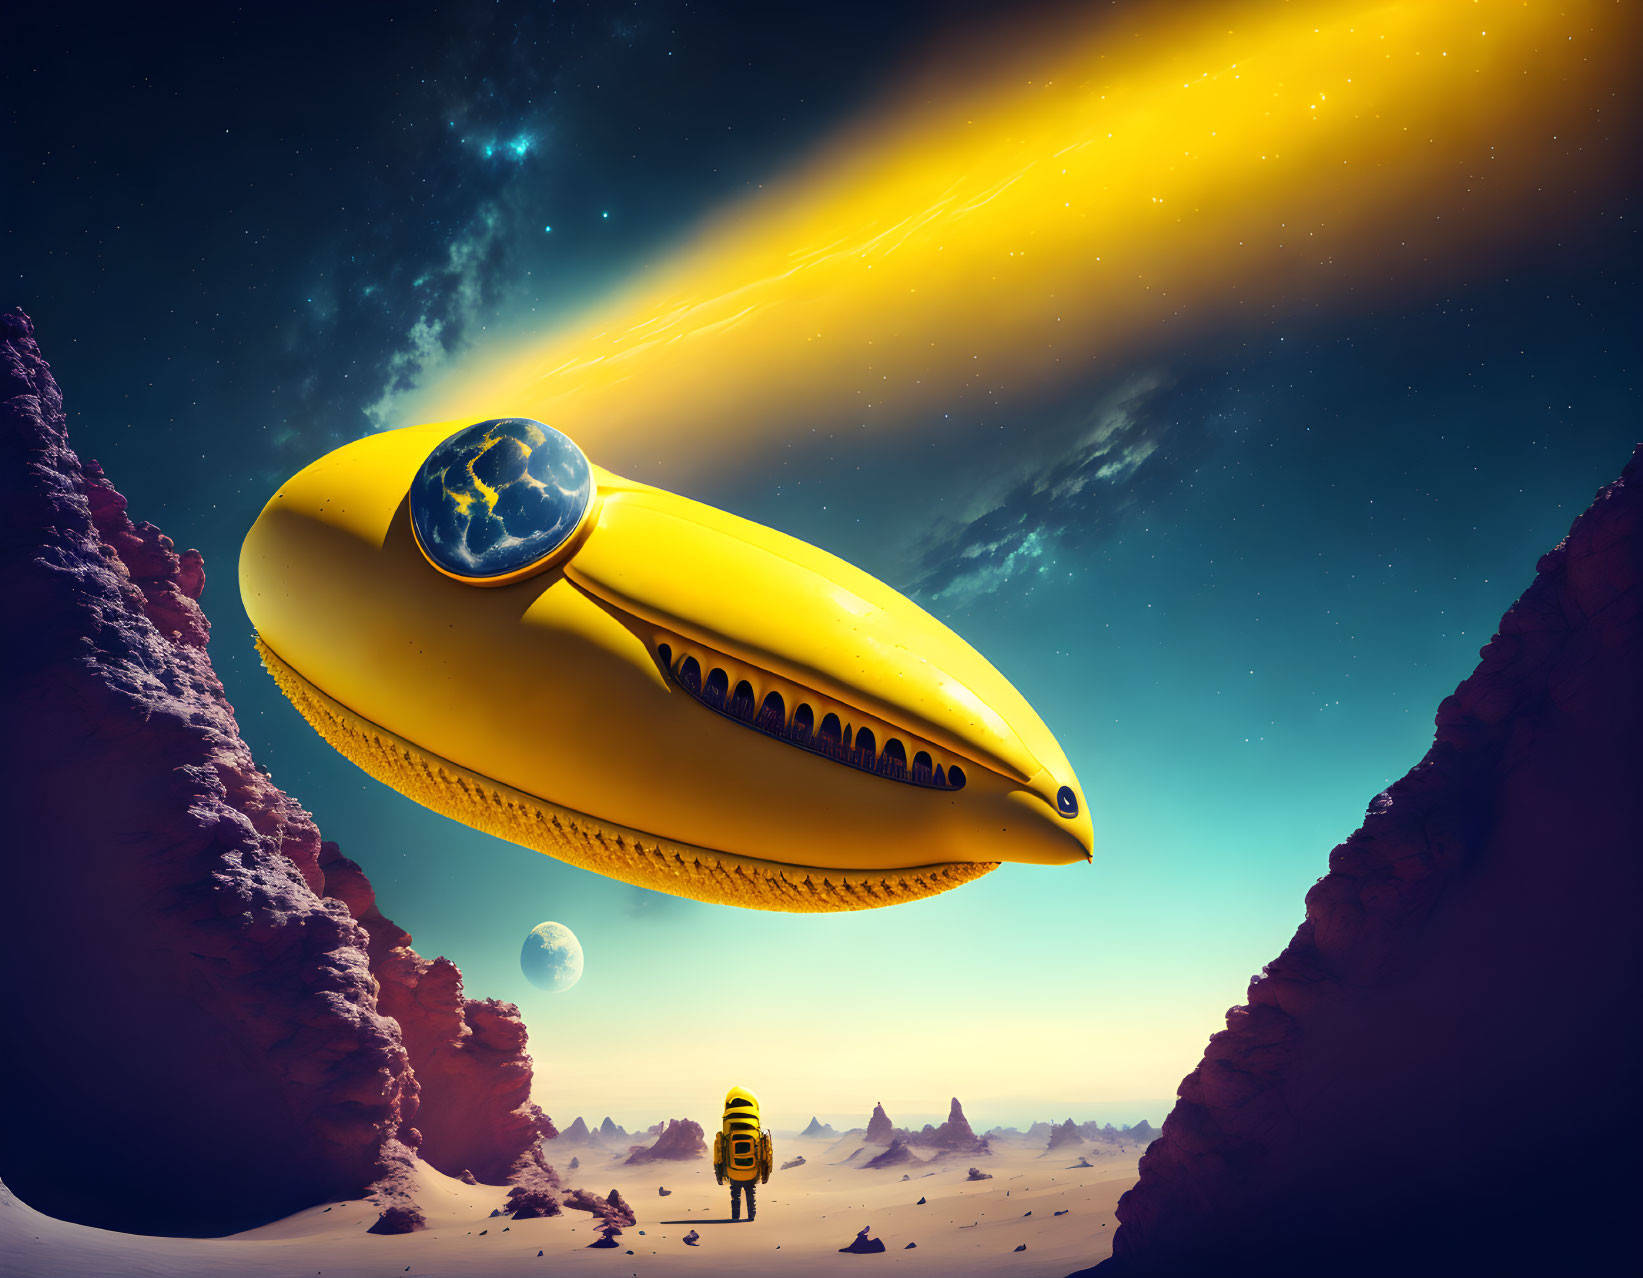 Yellow spacesuit figure on alien planet with banana-shaped spaceship and comet in starry sky